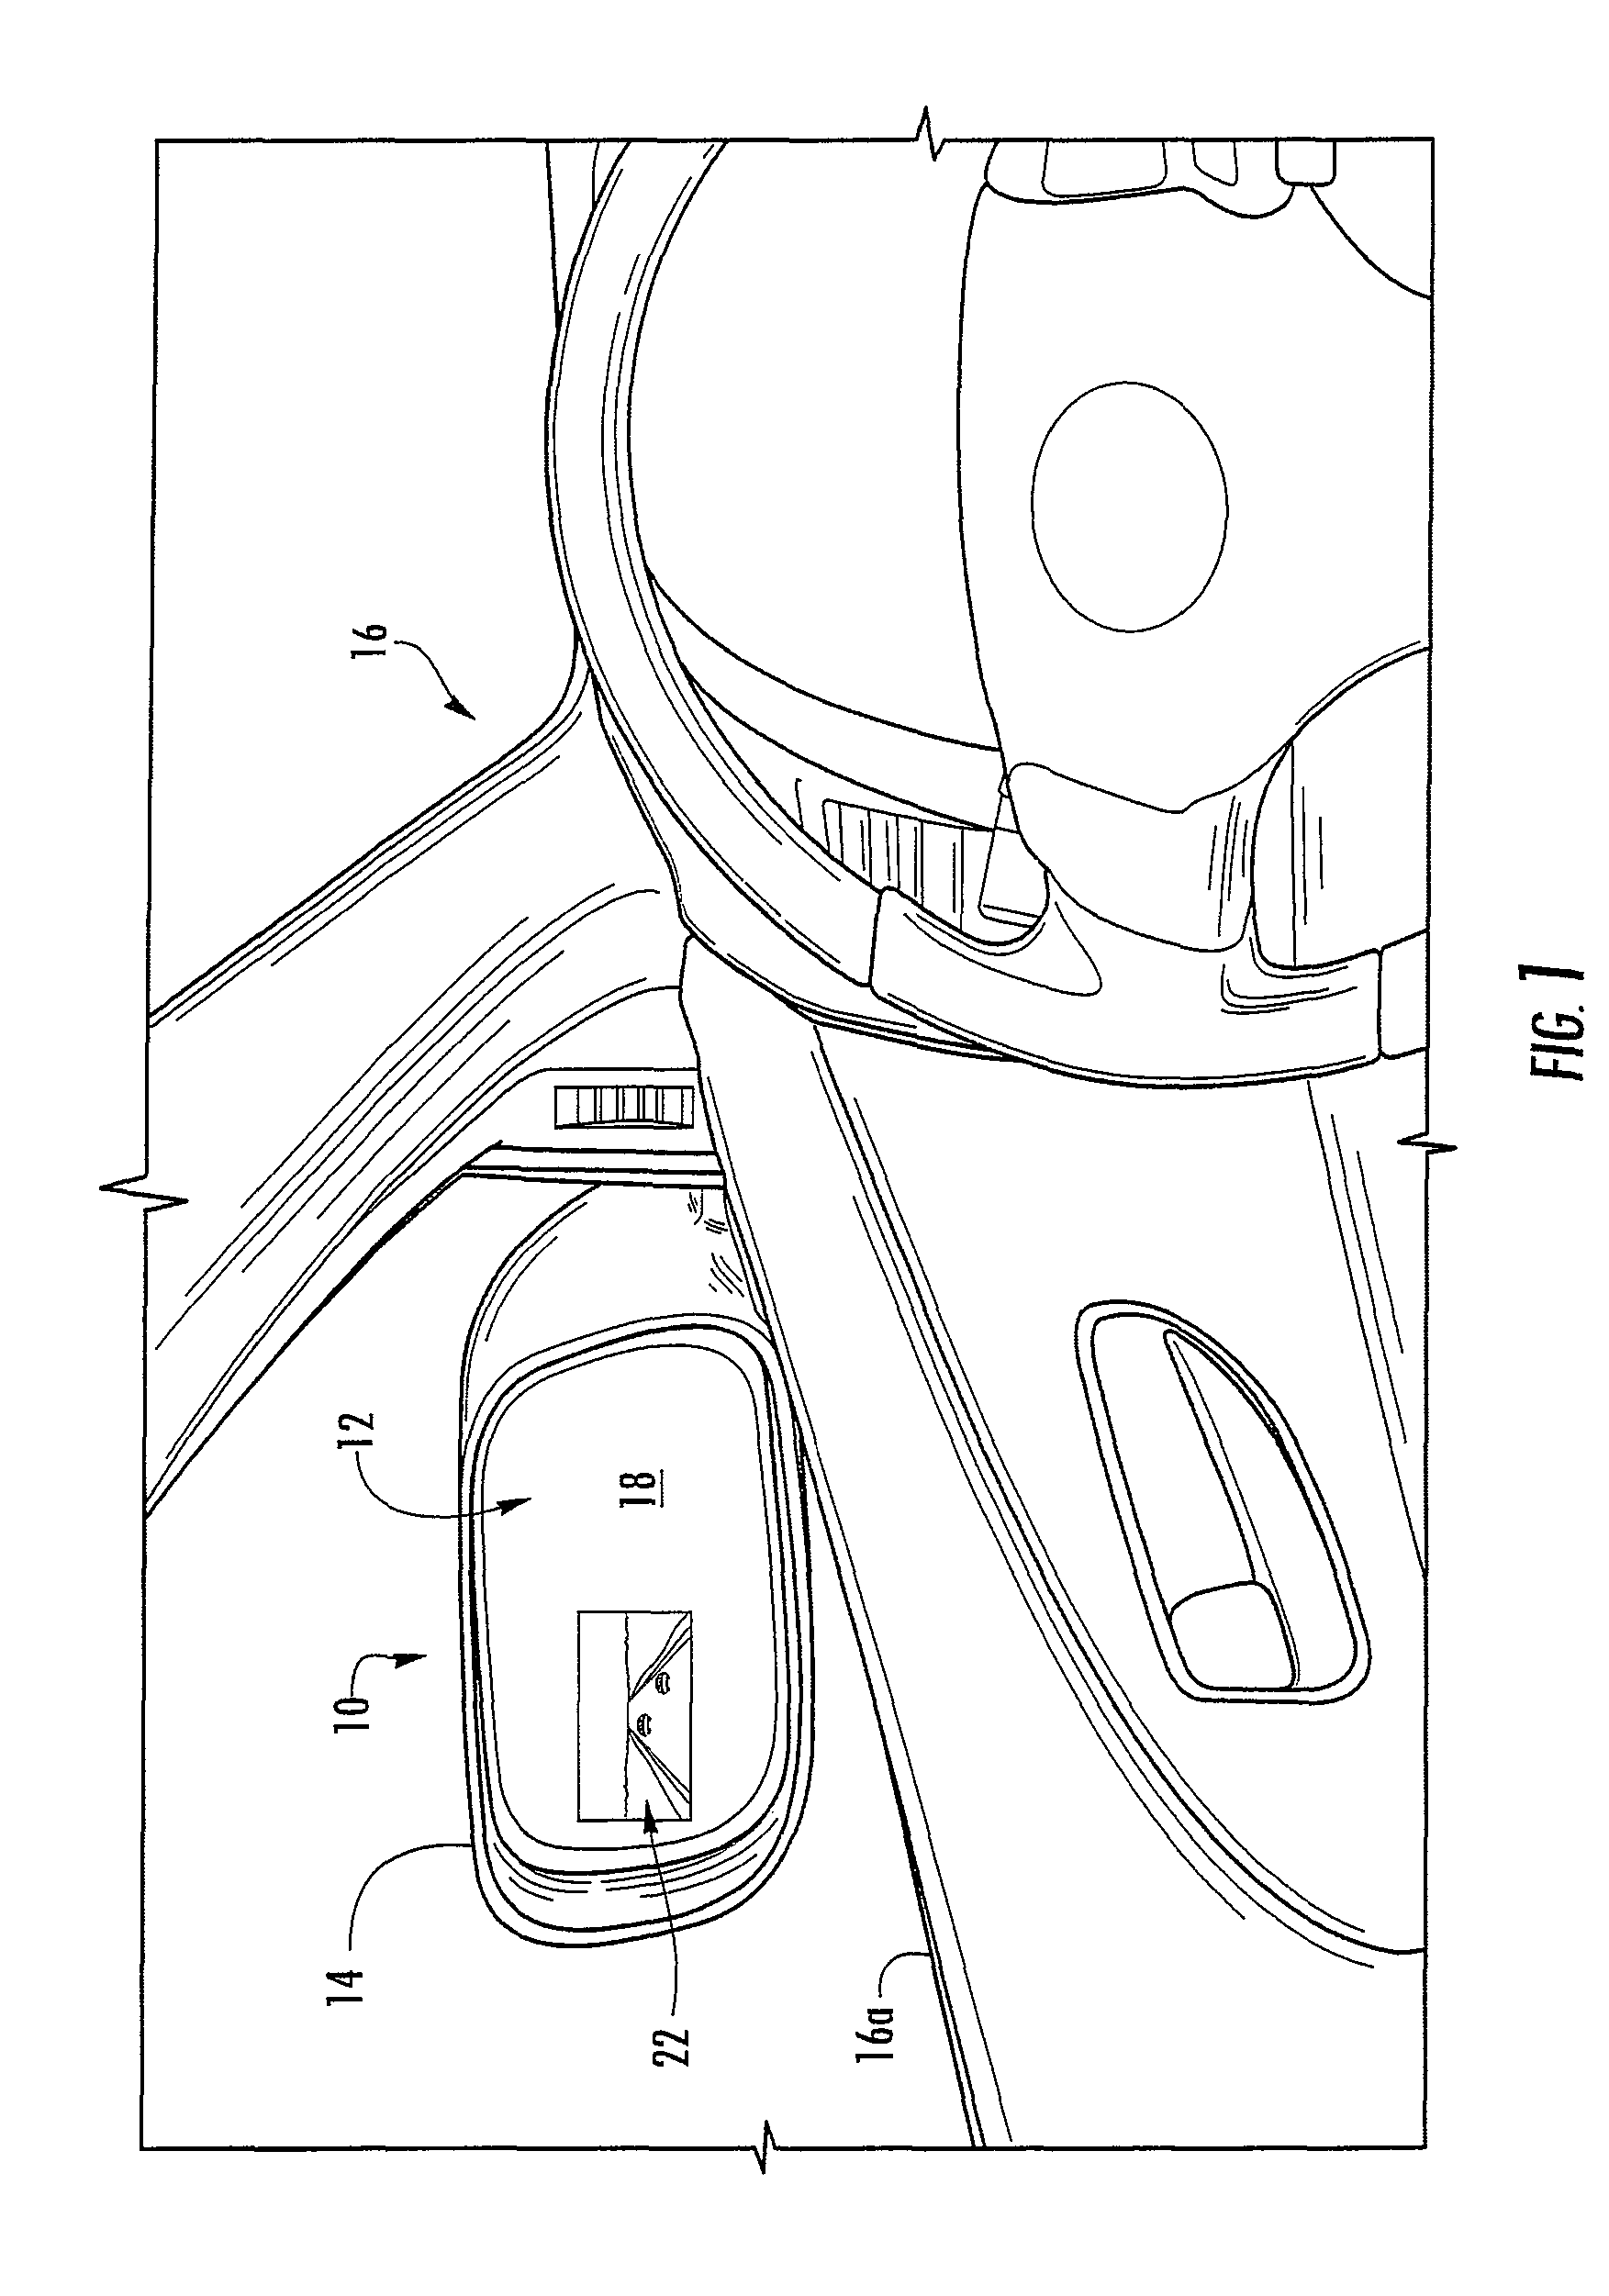 Display device for exterior rearview mirror